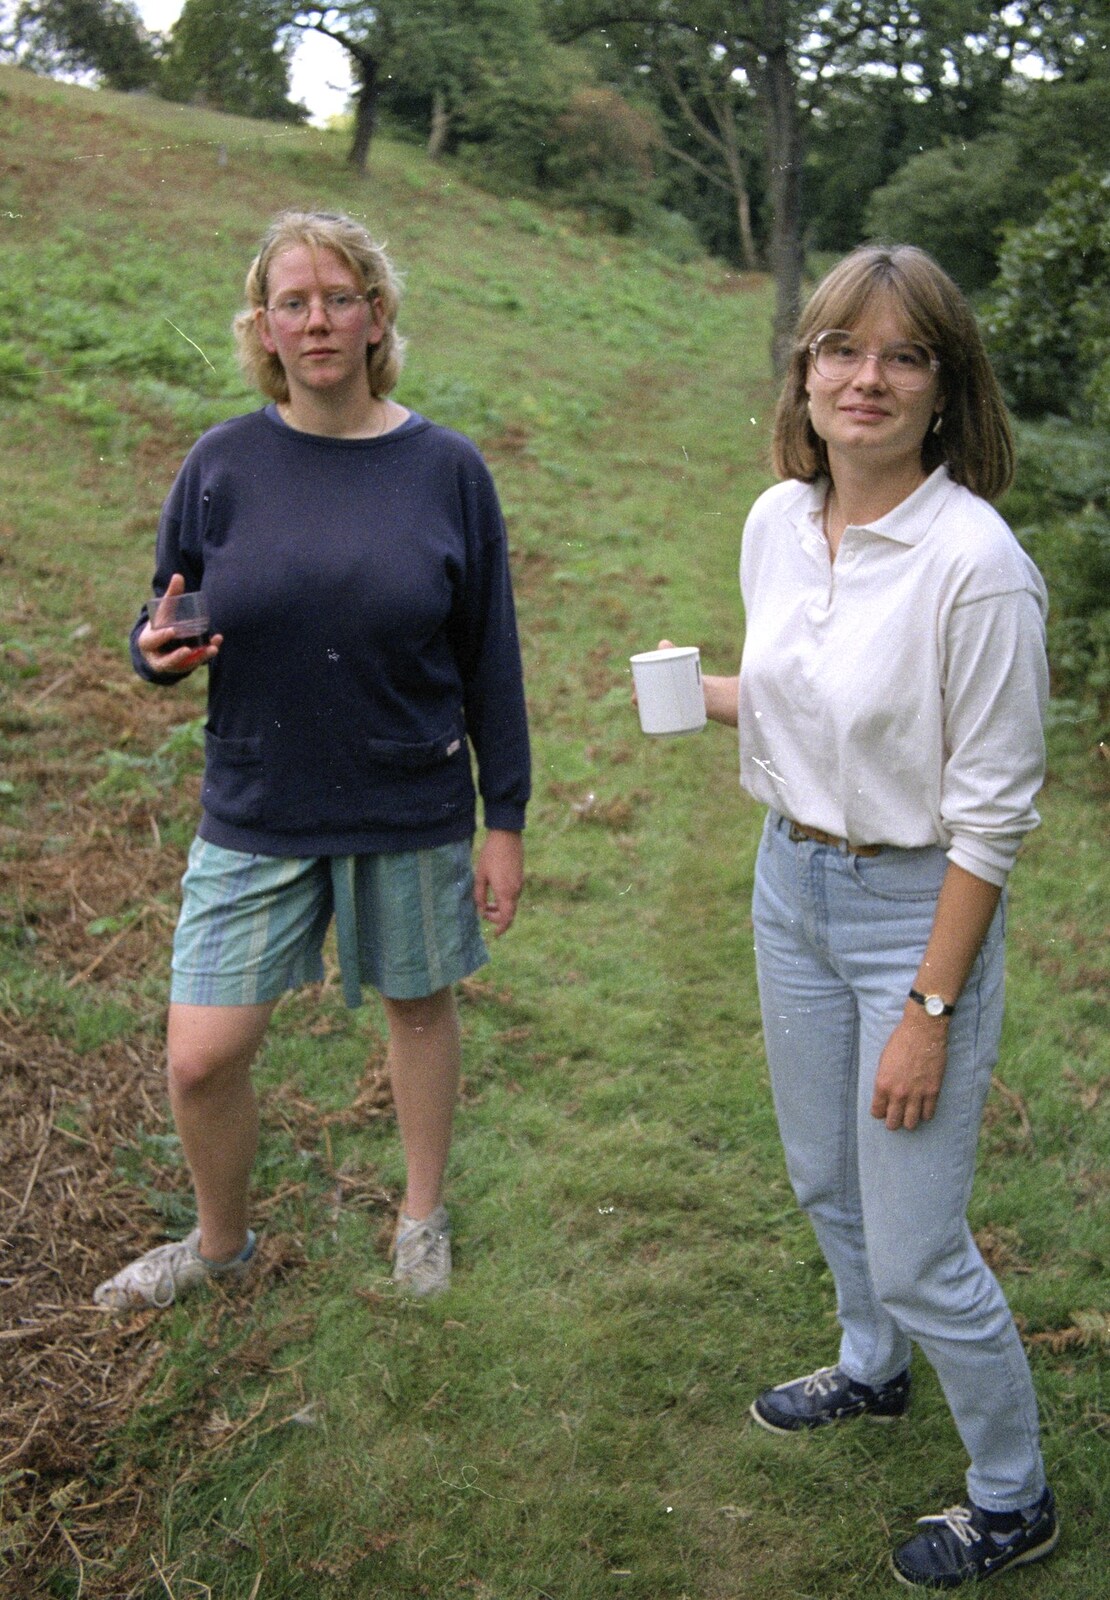 Liz's Party, Abergavenny, Monmouthshire, Wales - 4th August 1990: Liz (left) and chum, with a glass of red wine on the go